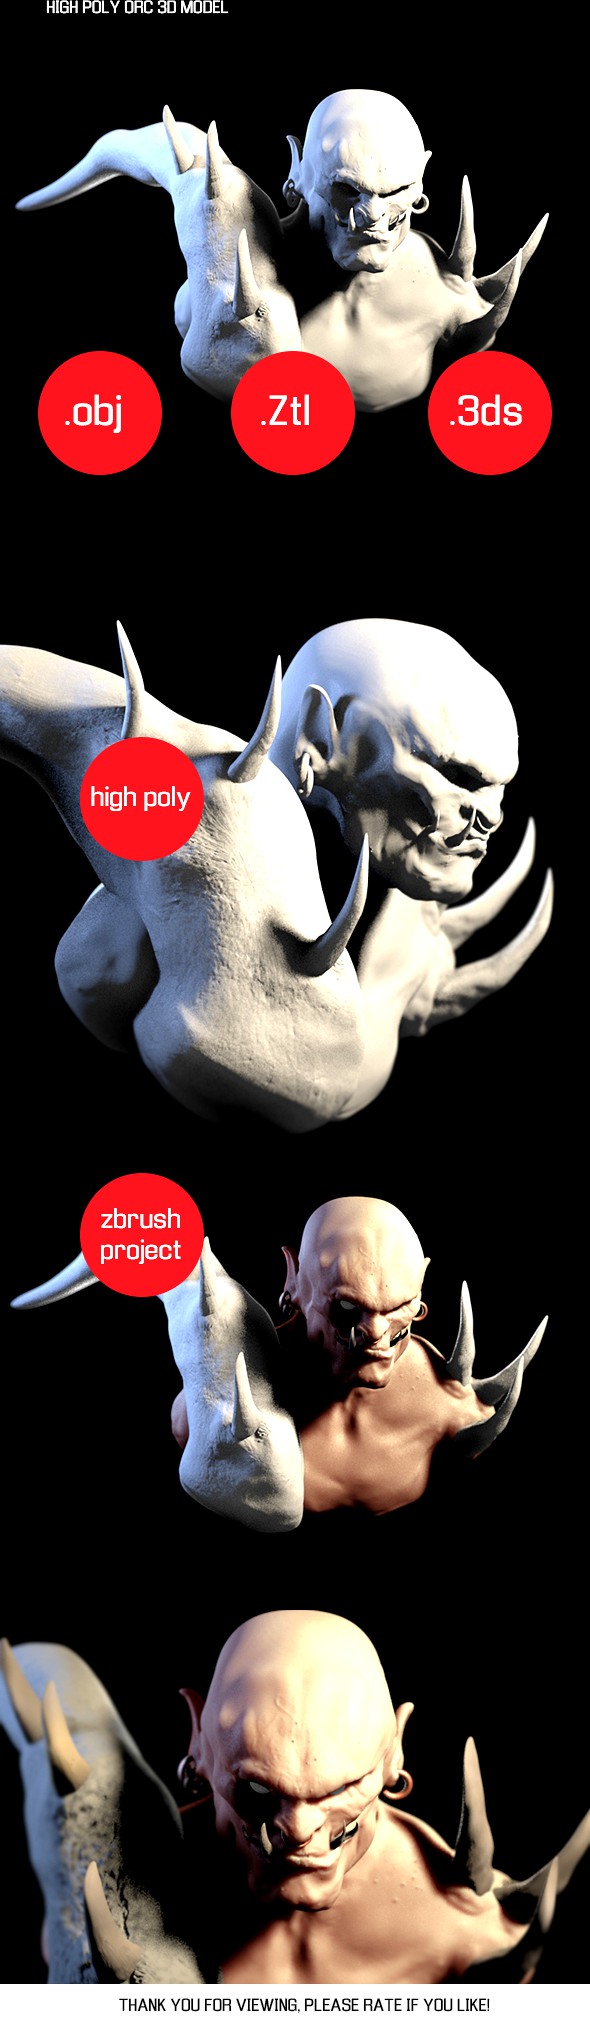 HIGH POLY ORC 3D MODEL